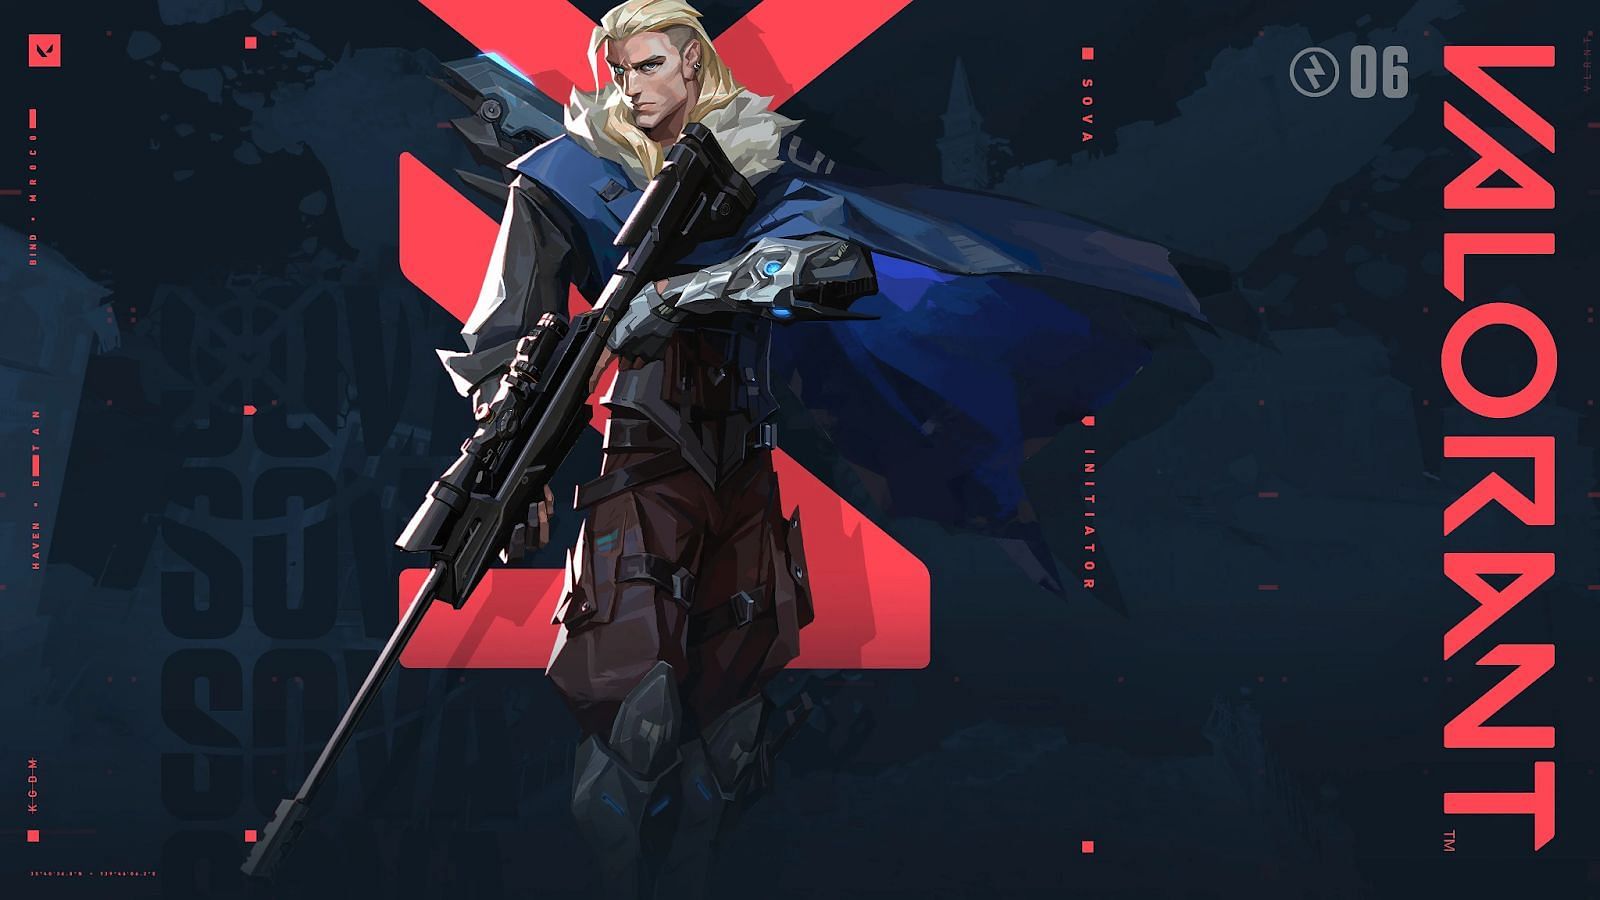 Sova shows his hunter powers dominantly on Bind (Image via Riot Games)